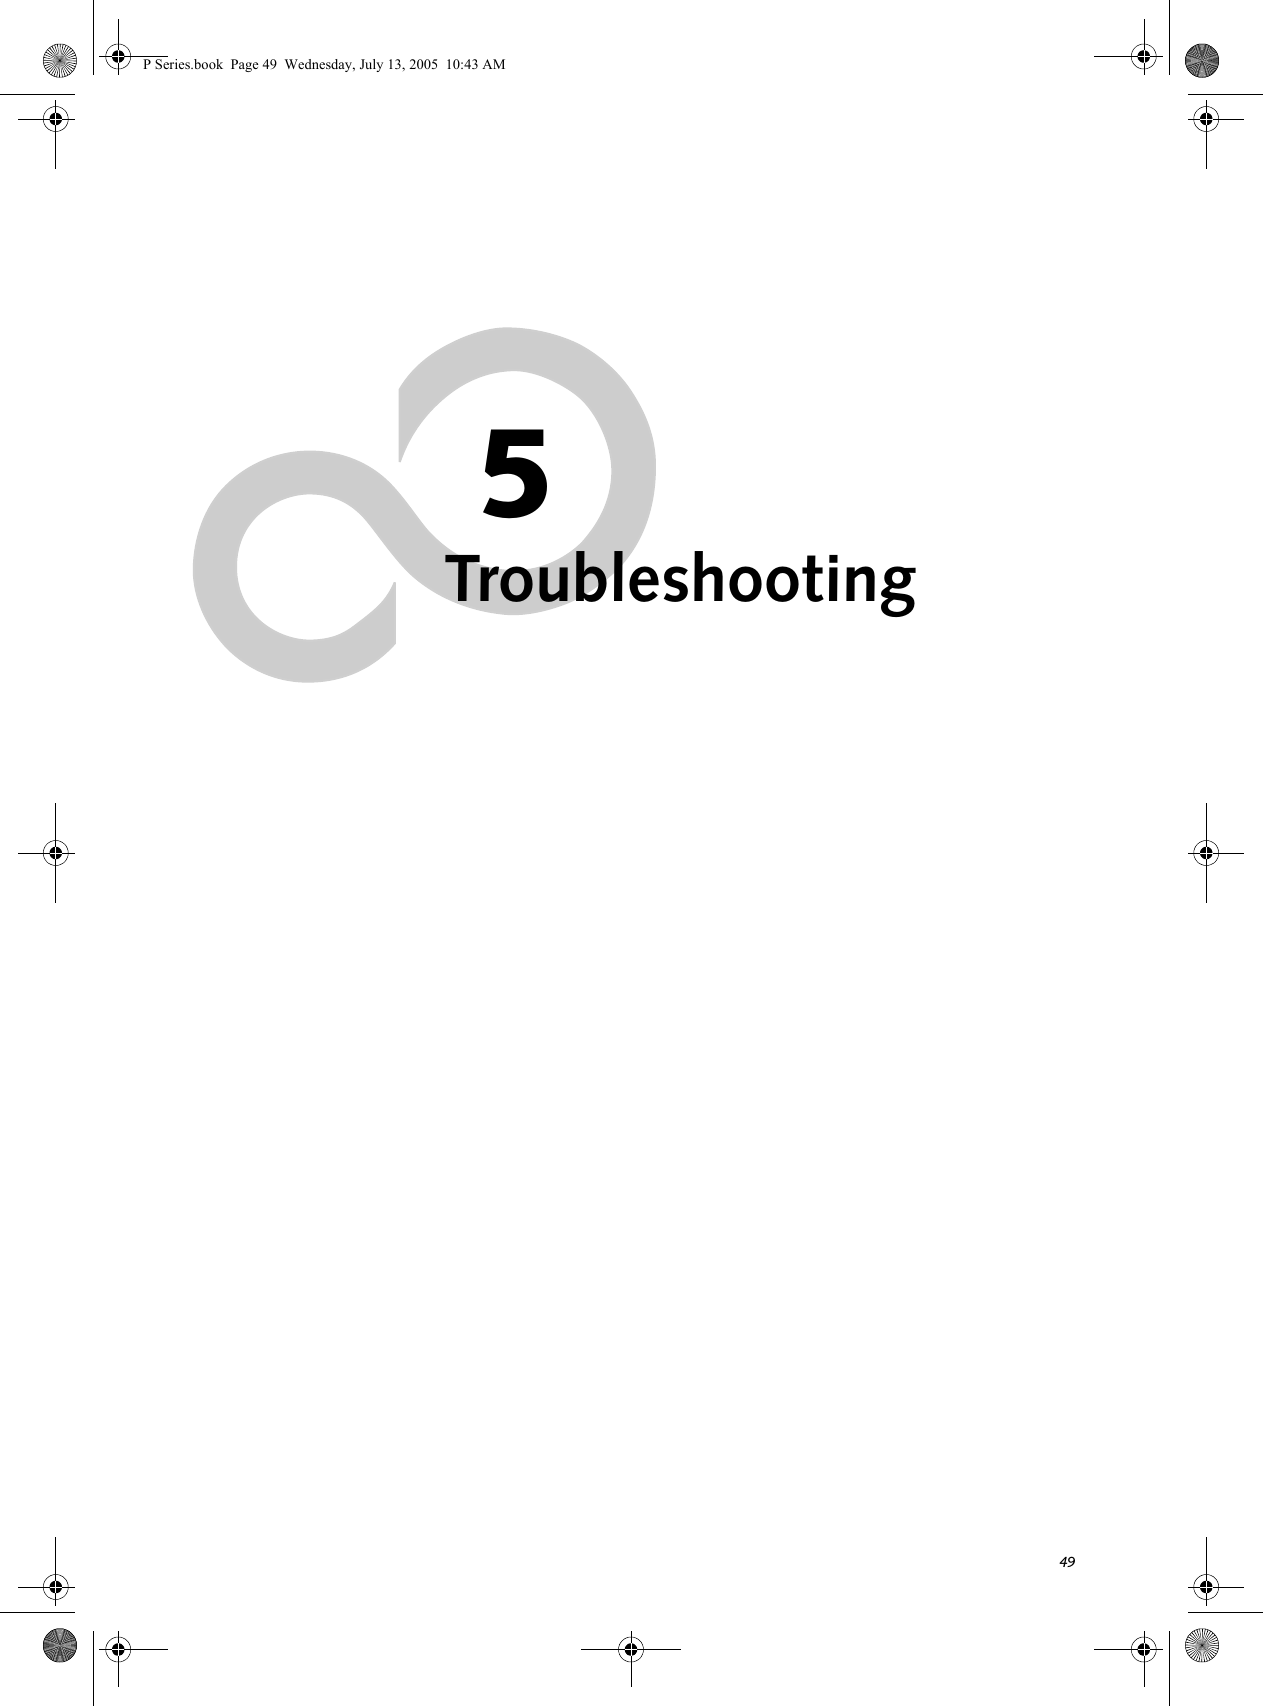 495TroubleshootingP Series.book  Page 49  Wednesday, July 13, 2005  10:43 AM